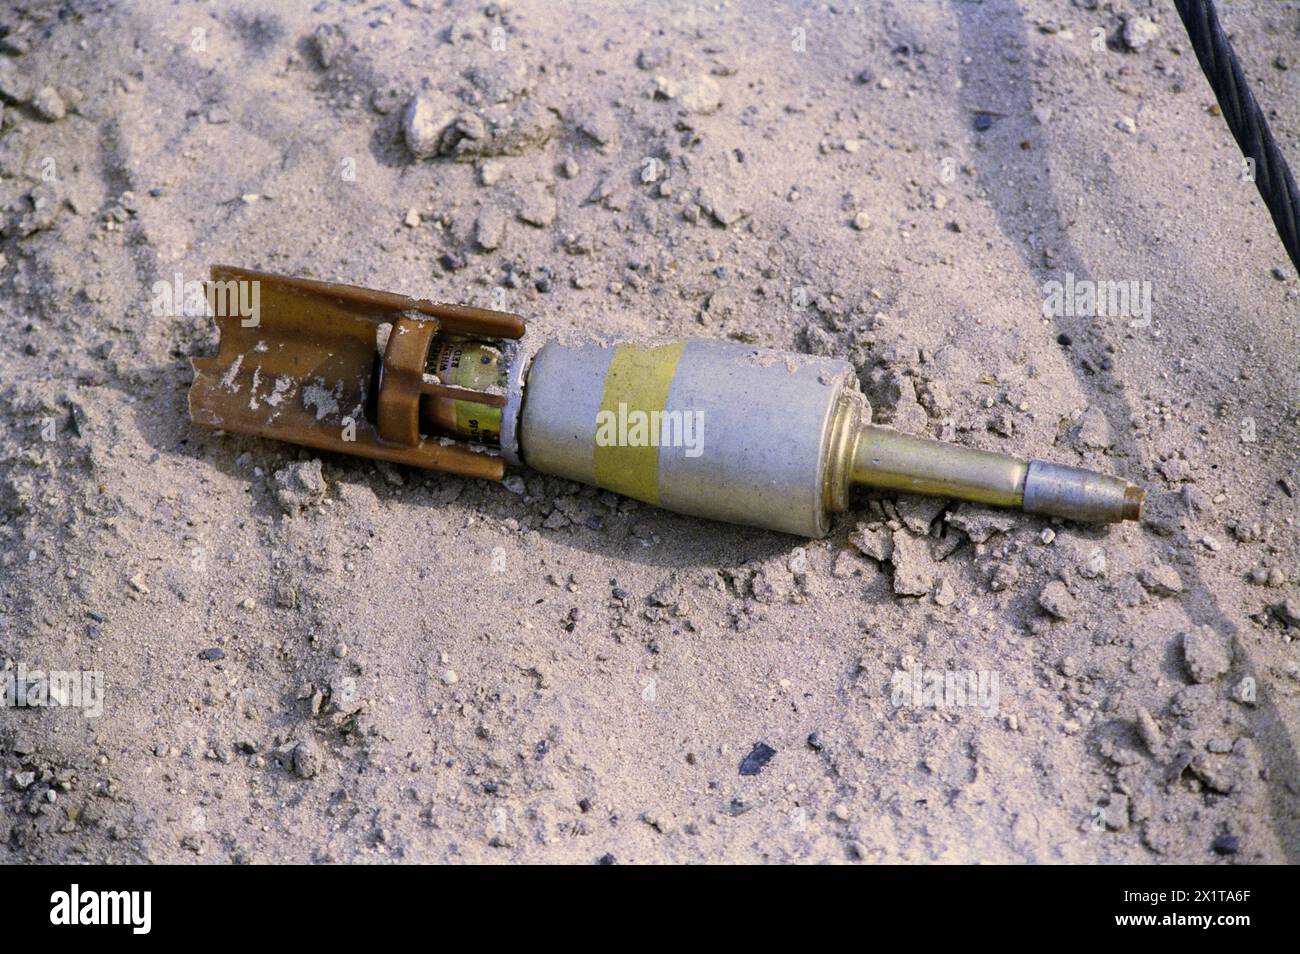 1st April 1991 An unexploded American Mk 118 Mod1 bomblet from a CBU-100 cluster bomb, on the Highway of Death, west of Kuwait City on the main highway to Basra. Stock Photo